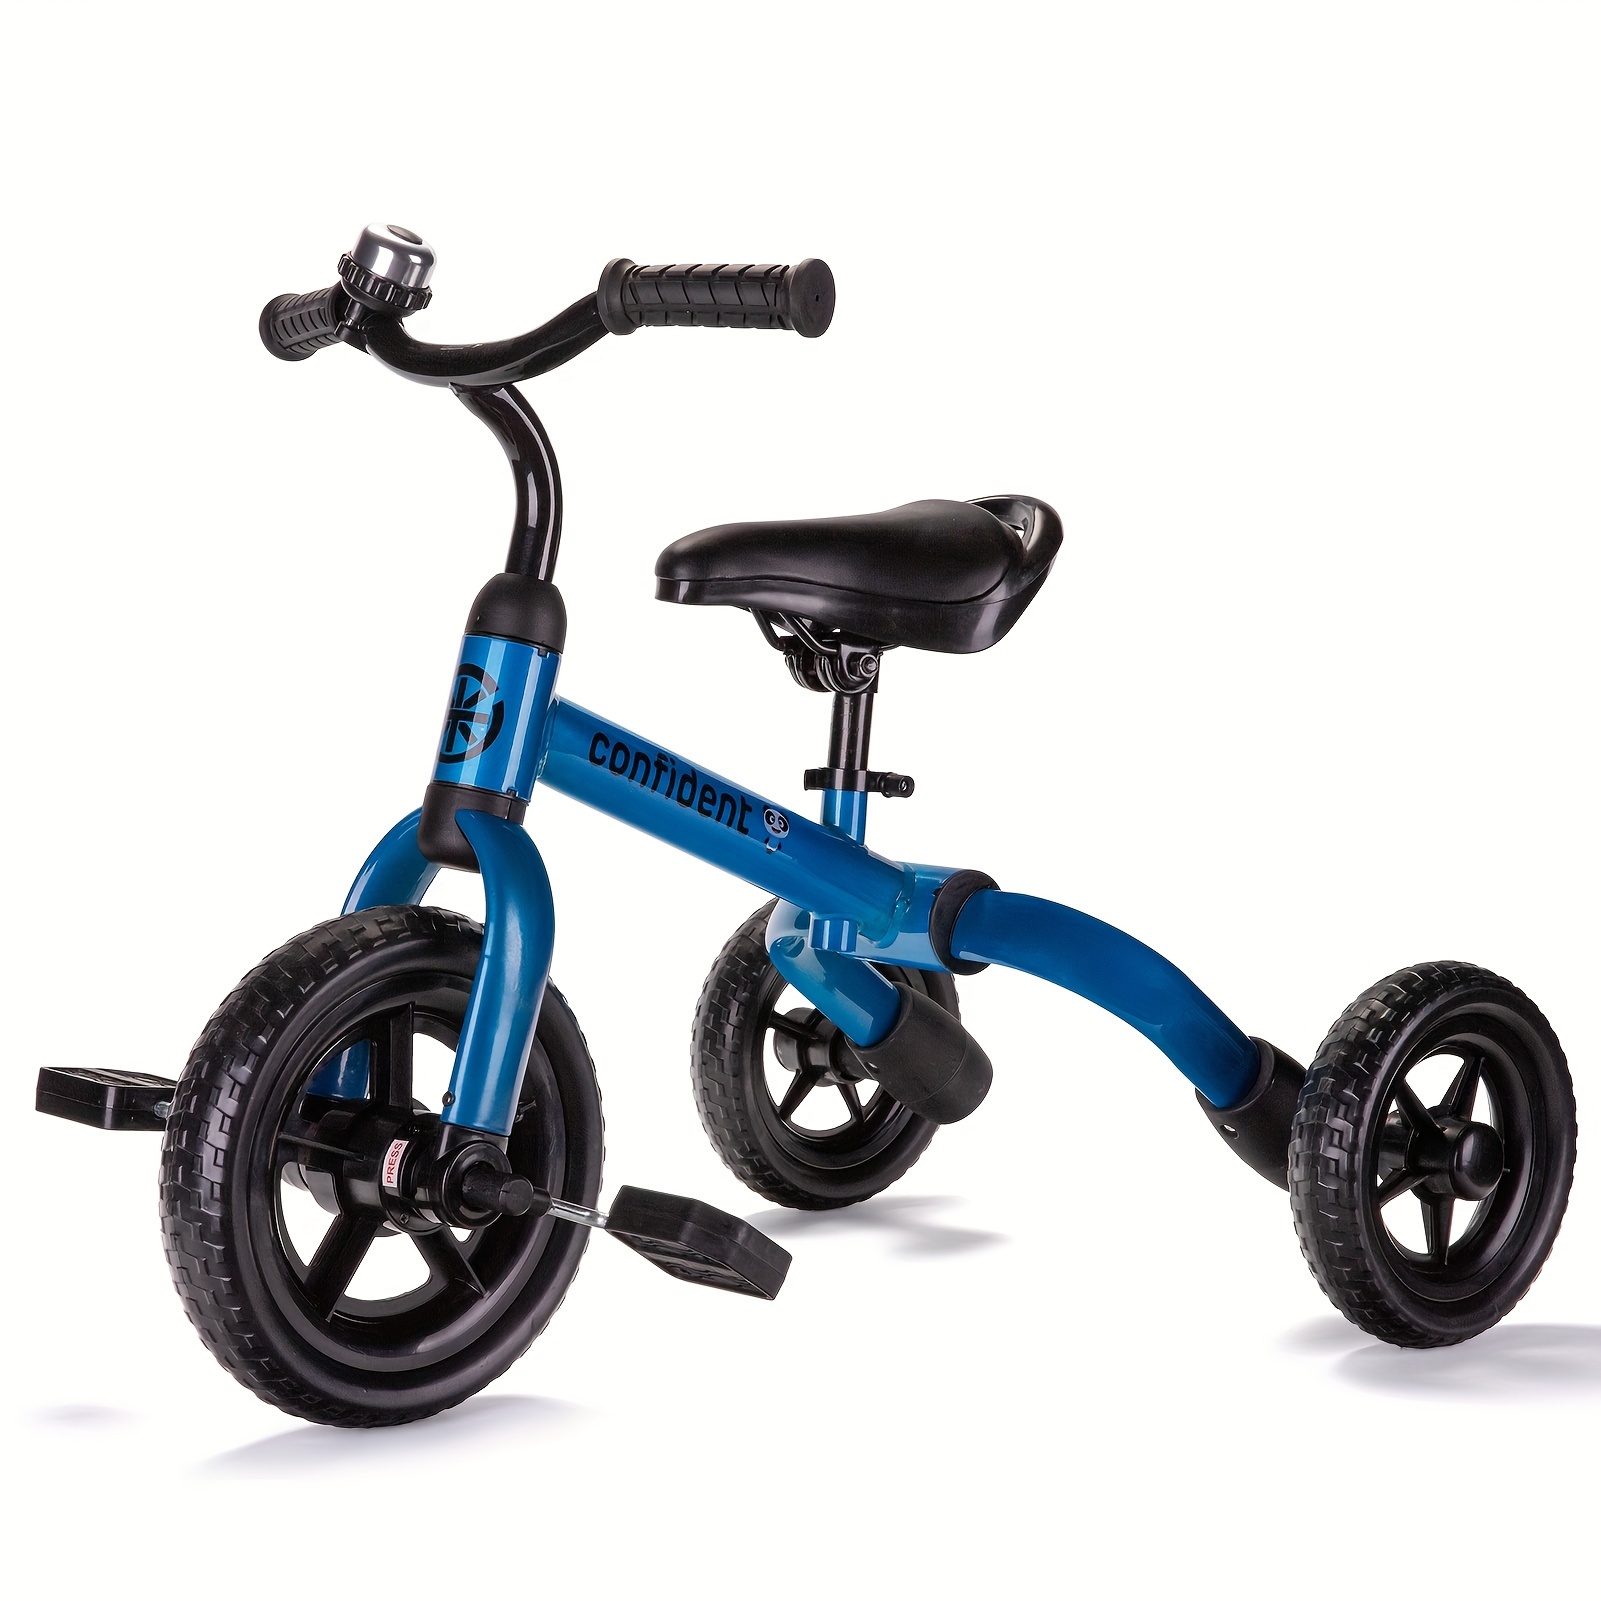 

3 In 1 Tricycle Folding Balance Bike With Adjustable Seat And Removable Pedal, Ride-on Bike Toys Bike Birthday Gift